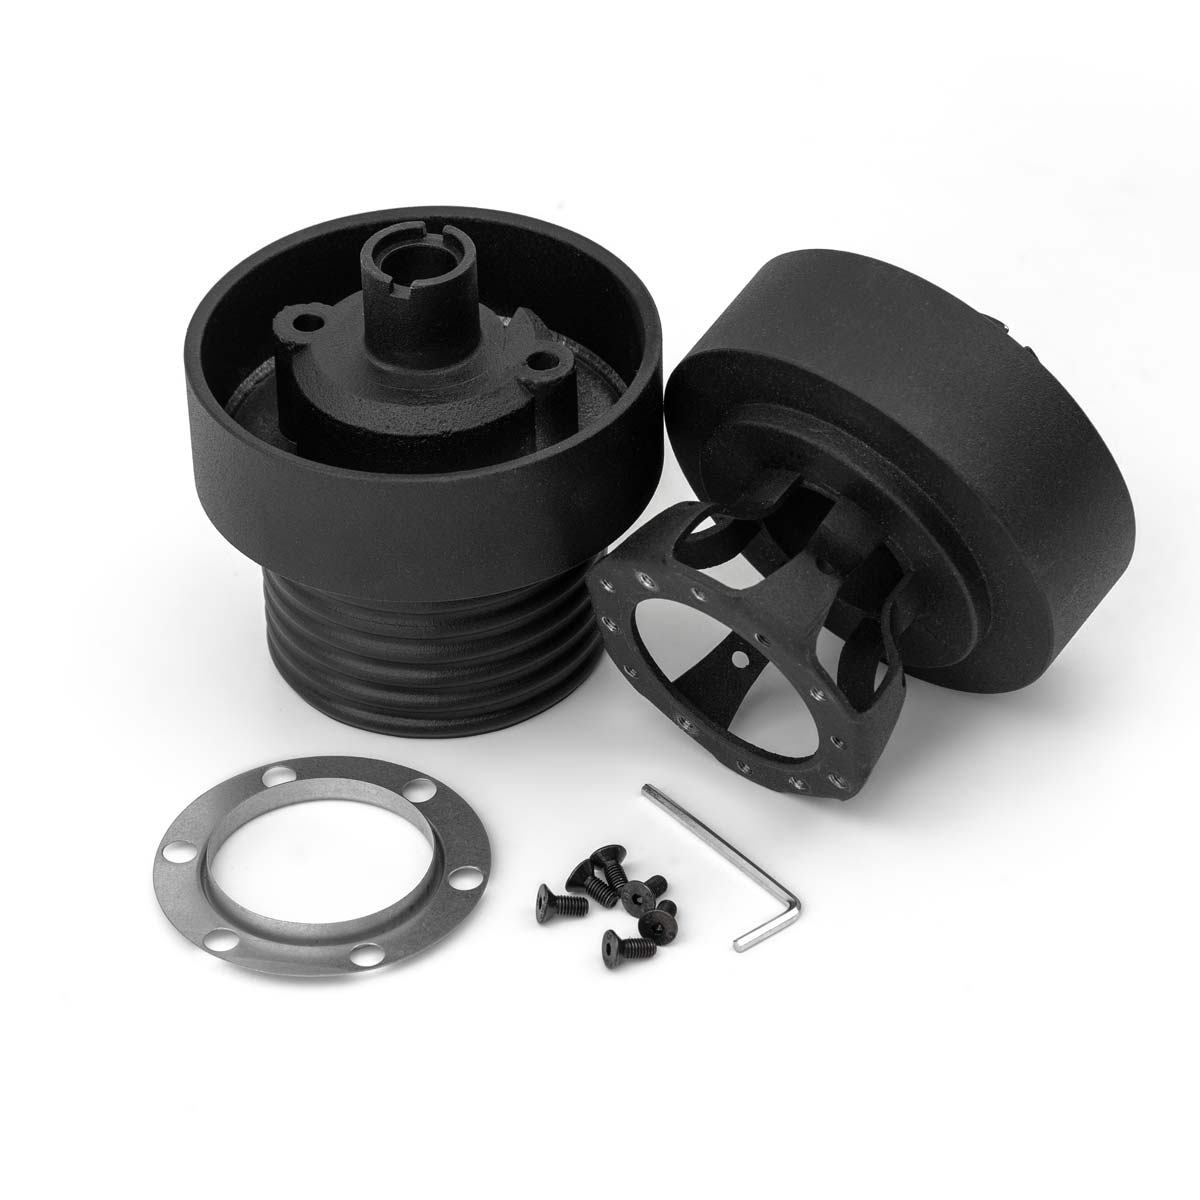 LUISI steering wheel hub Nissan Sunny from 1996 (TÜV-compliant deformable / 6x74mm 6x70mm)